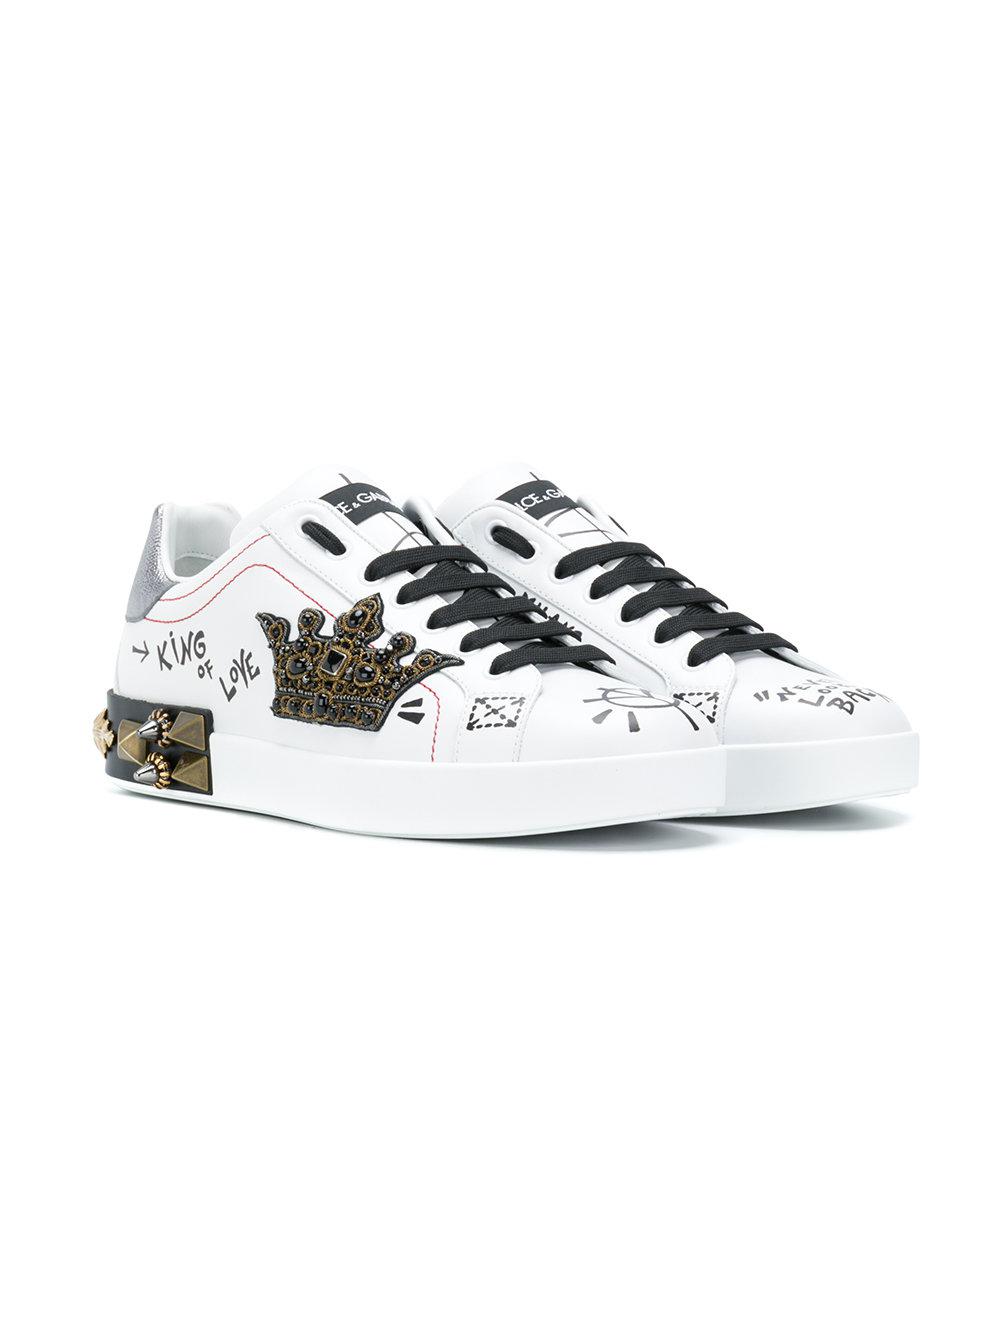 Dolce & Gabbana Leather King Of Love Sneakers in White for Men - Lyst